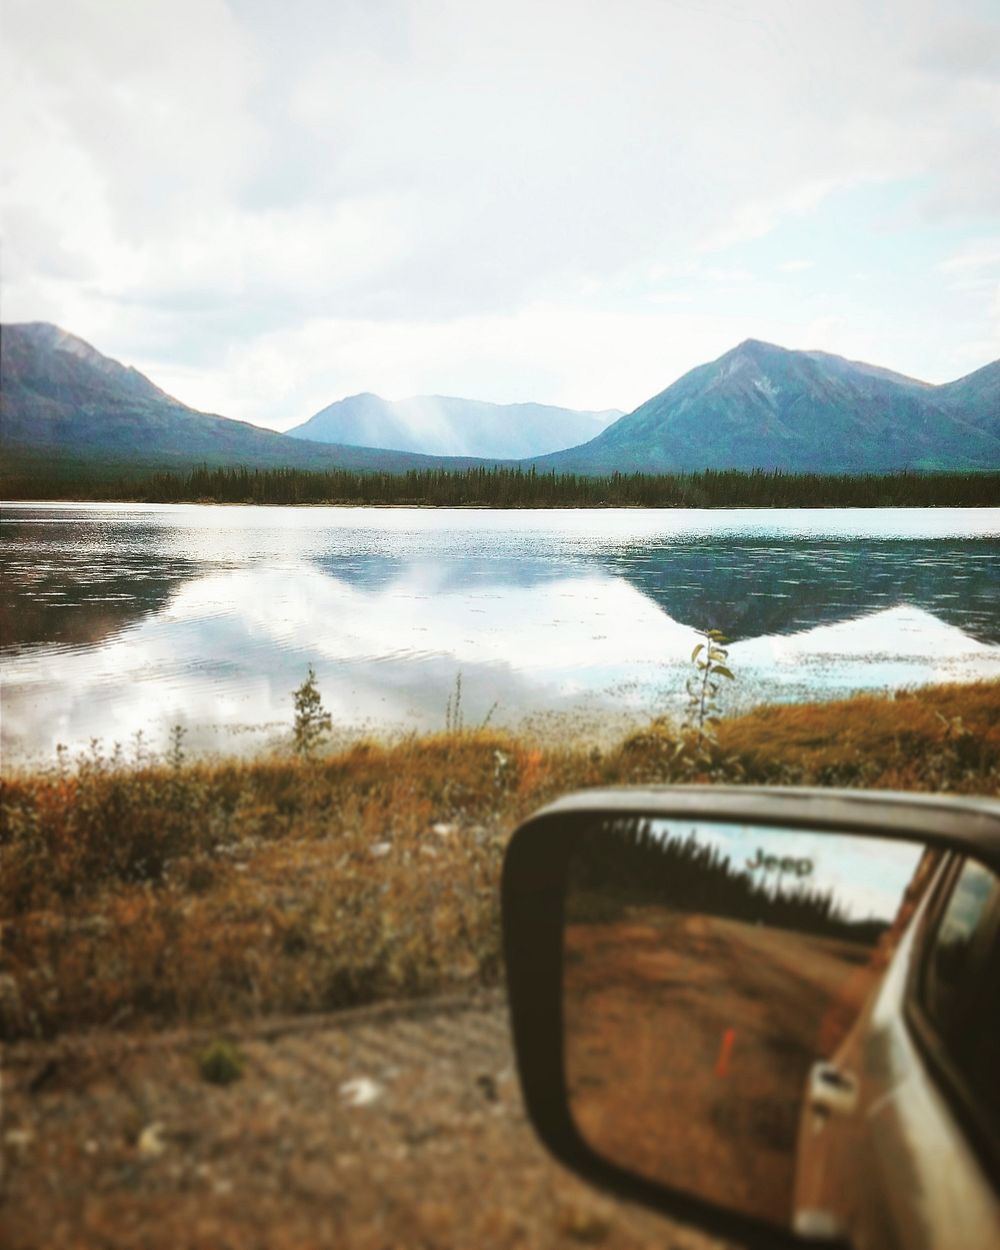 View from a car on its mirror and a quiet lake in the mountains. Original public domain image from Wikimedia Commons